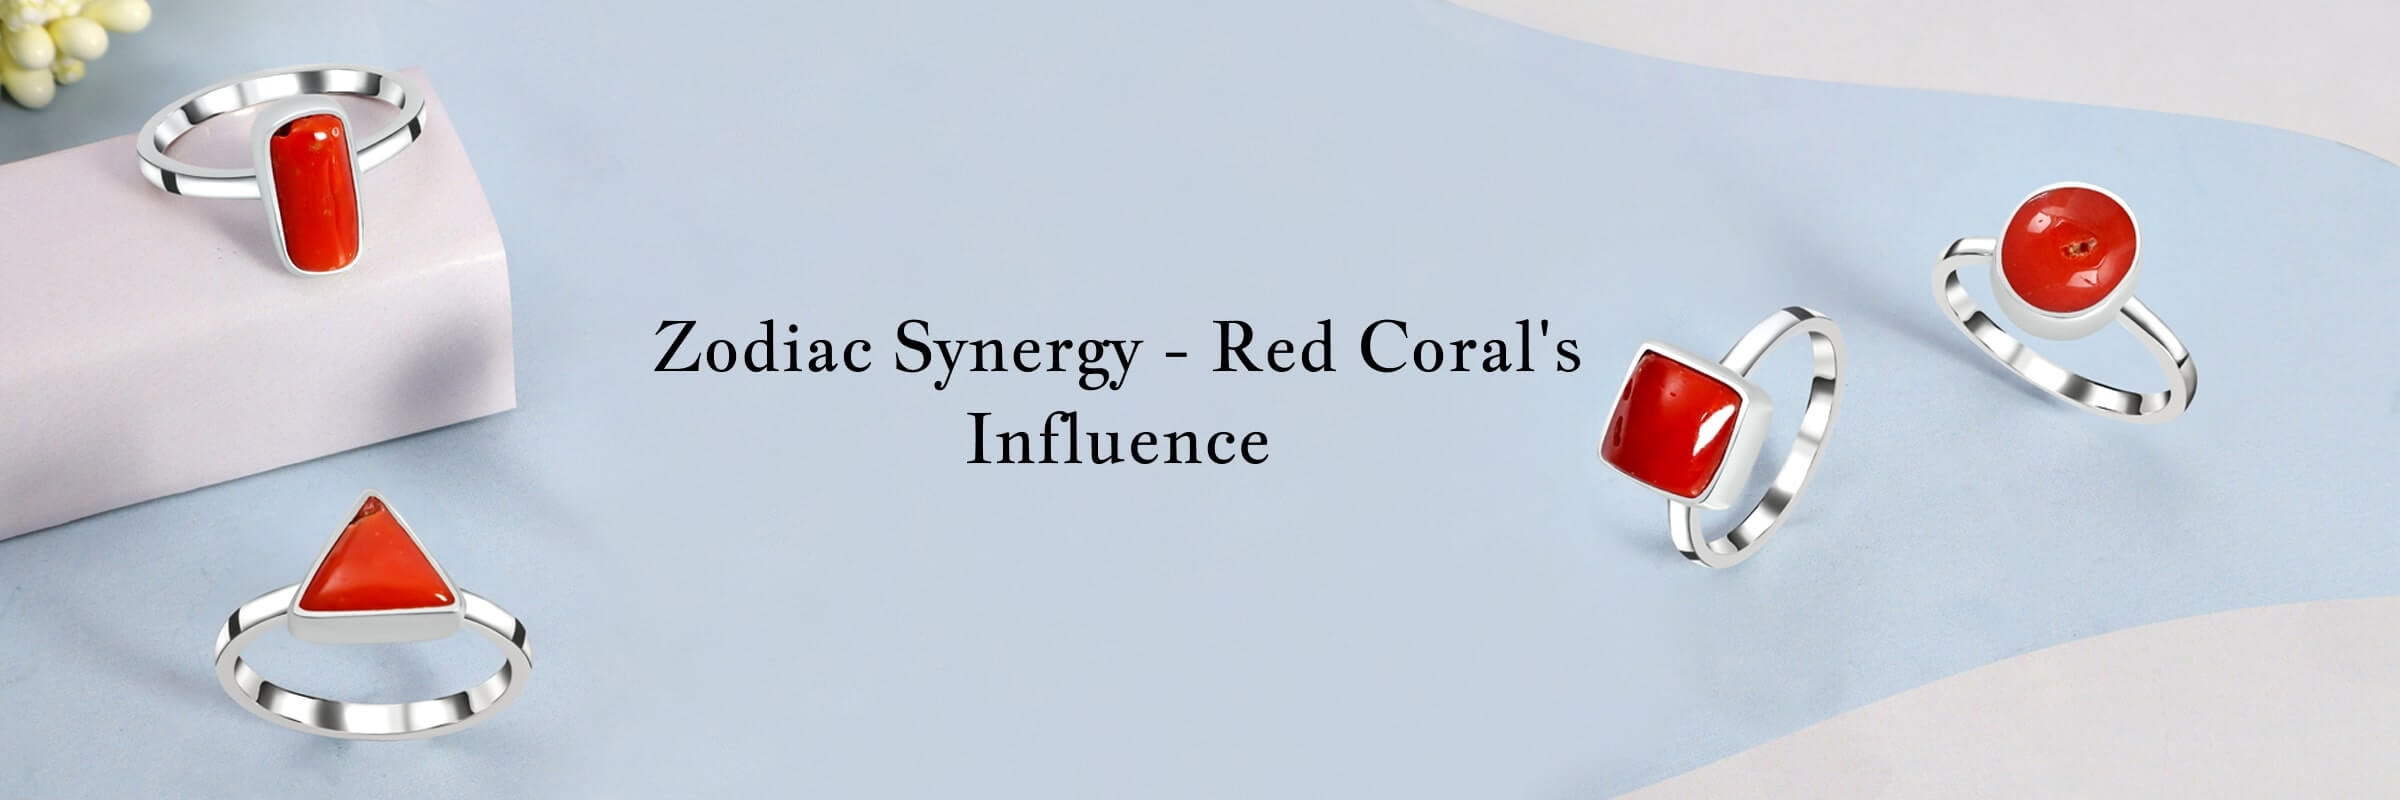 Red coral Zodiac sign